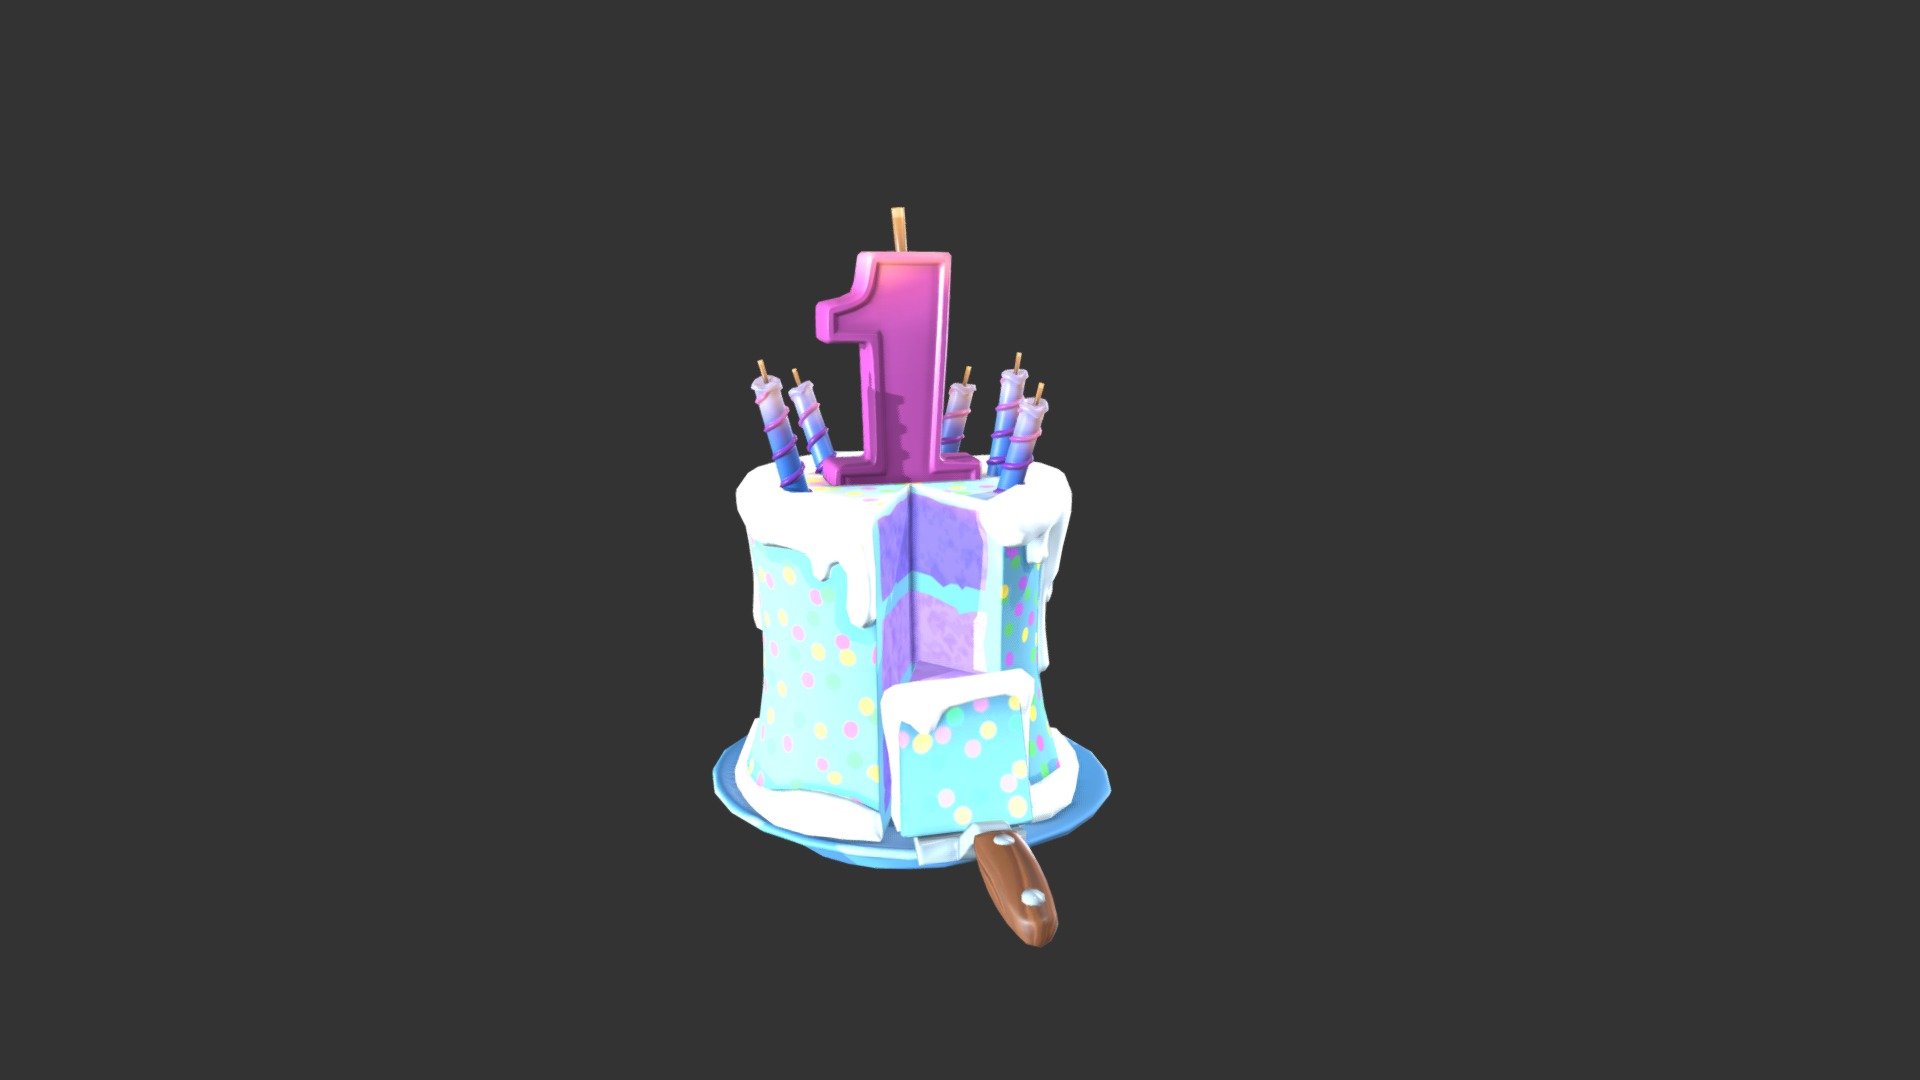 Fortnite Birthday Images Wallpapers